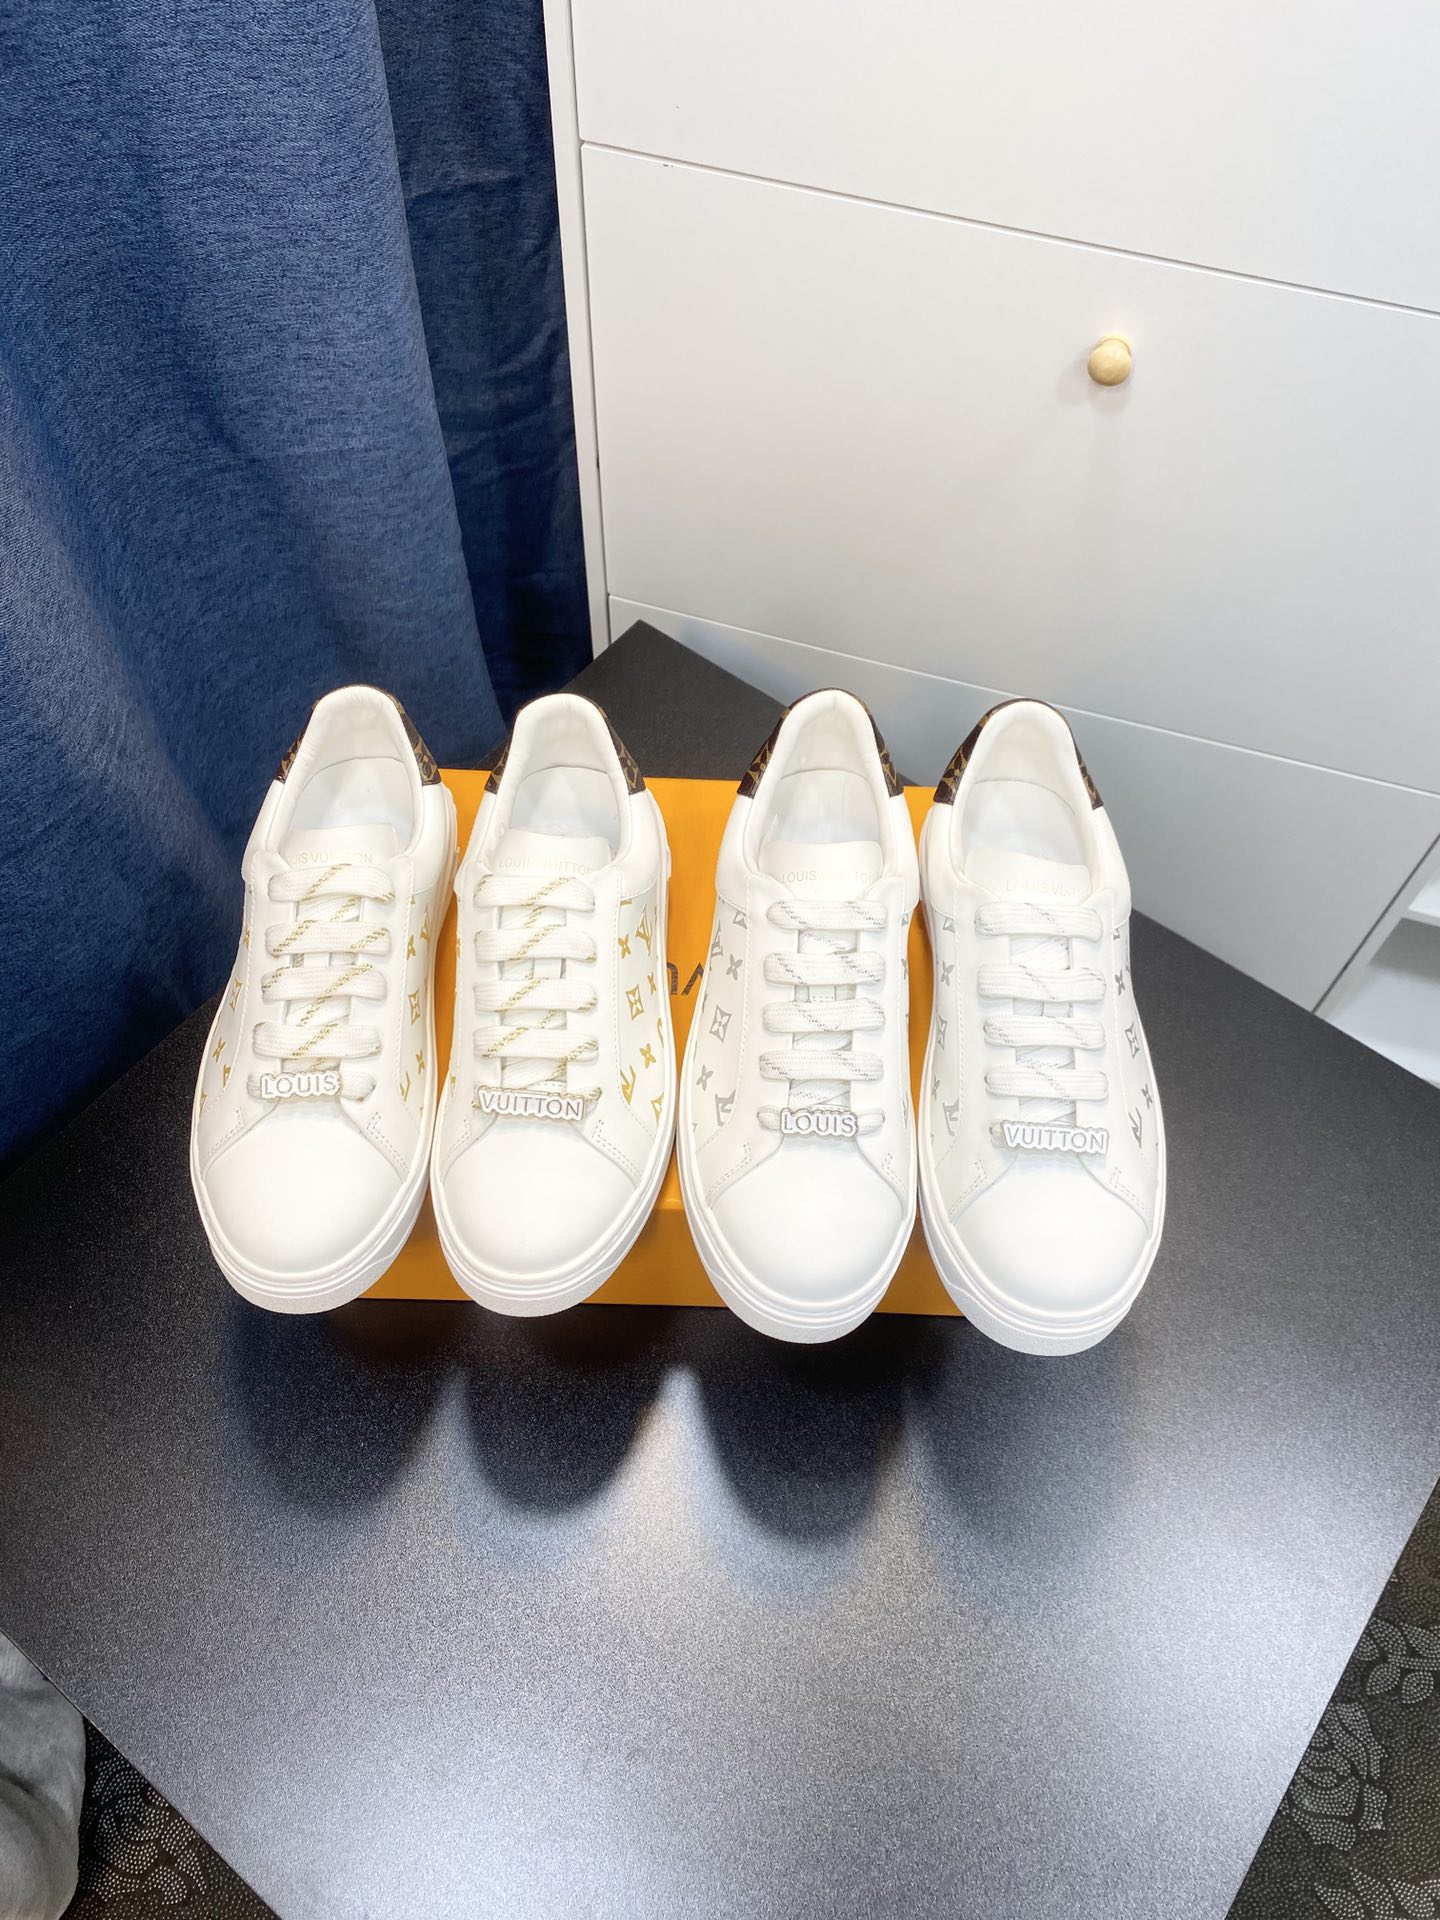 Lv new white shoes